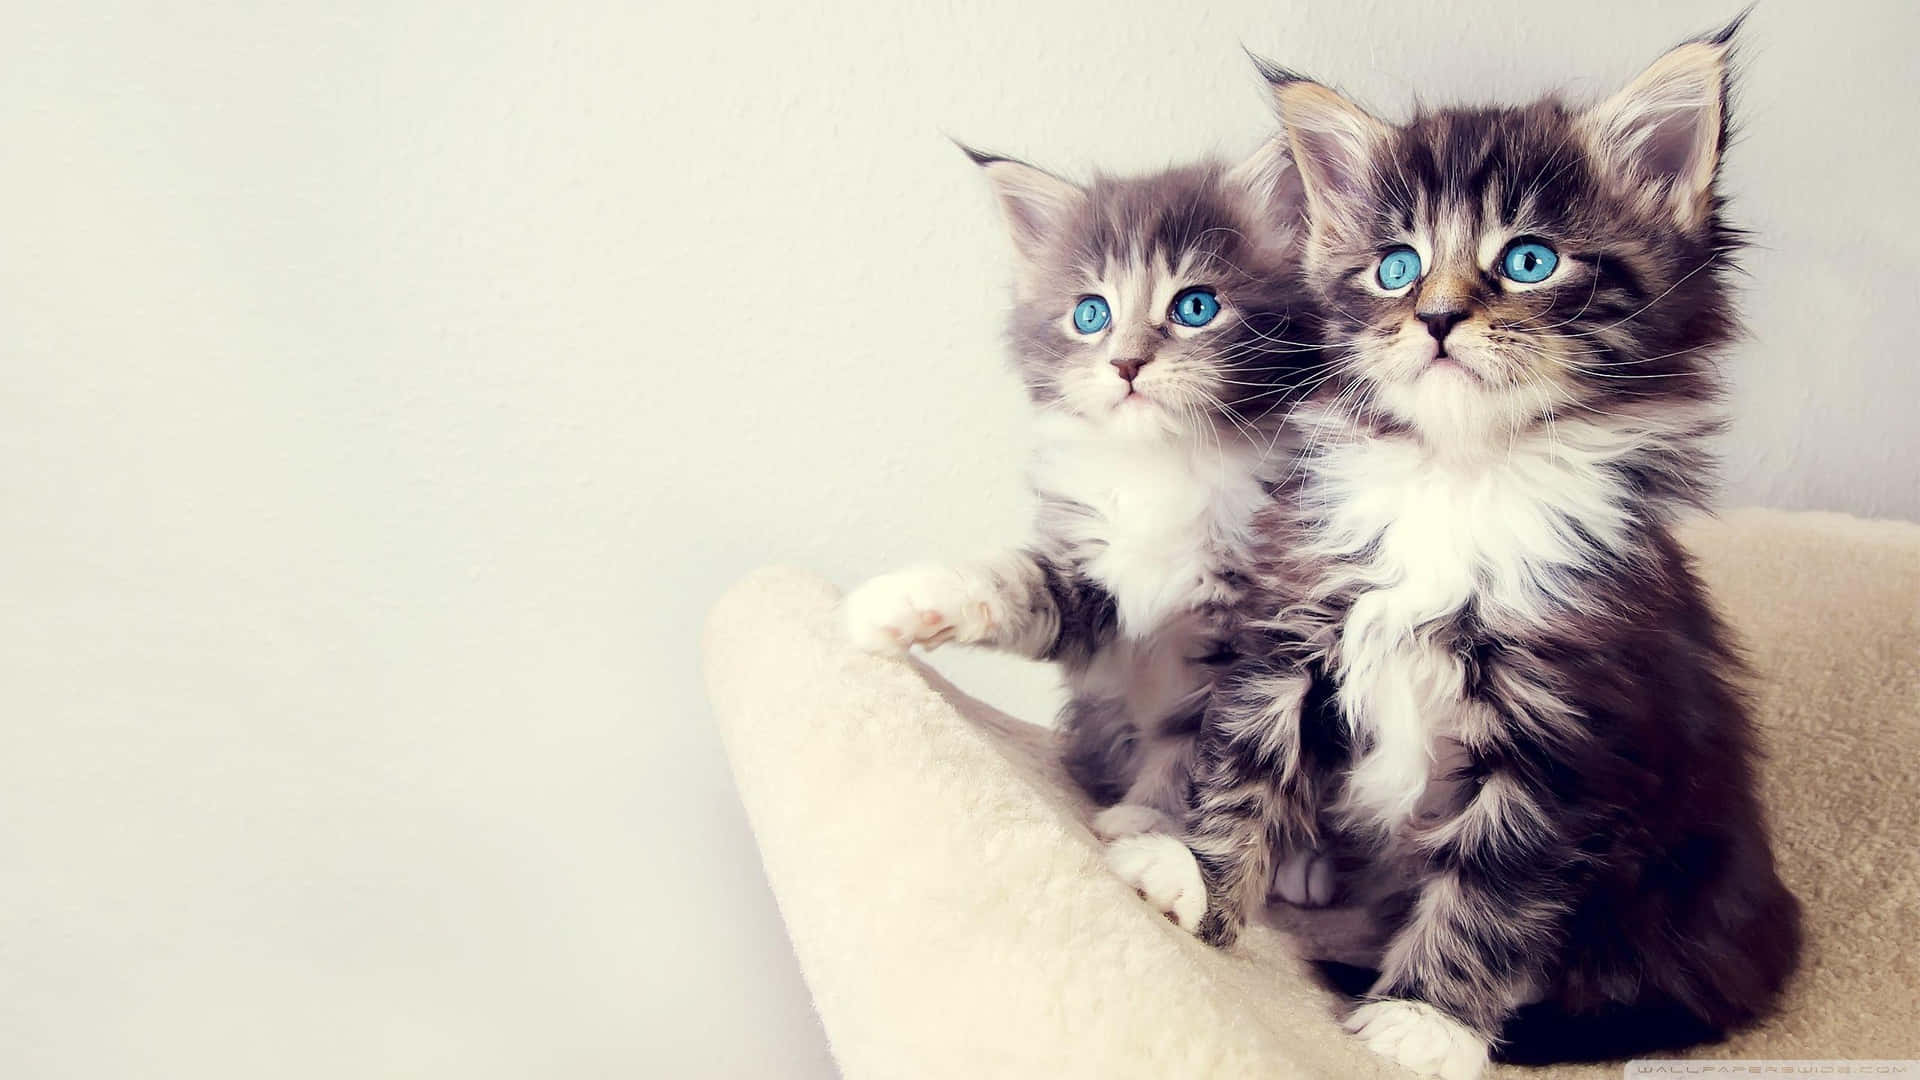 Two Kittens Sitting On A Chair With Blue Eyes